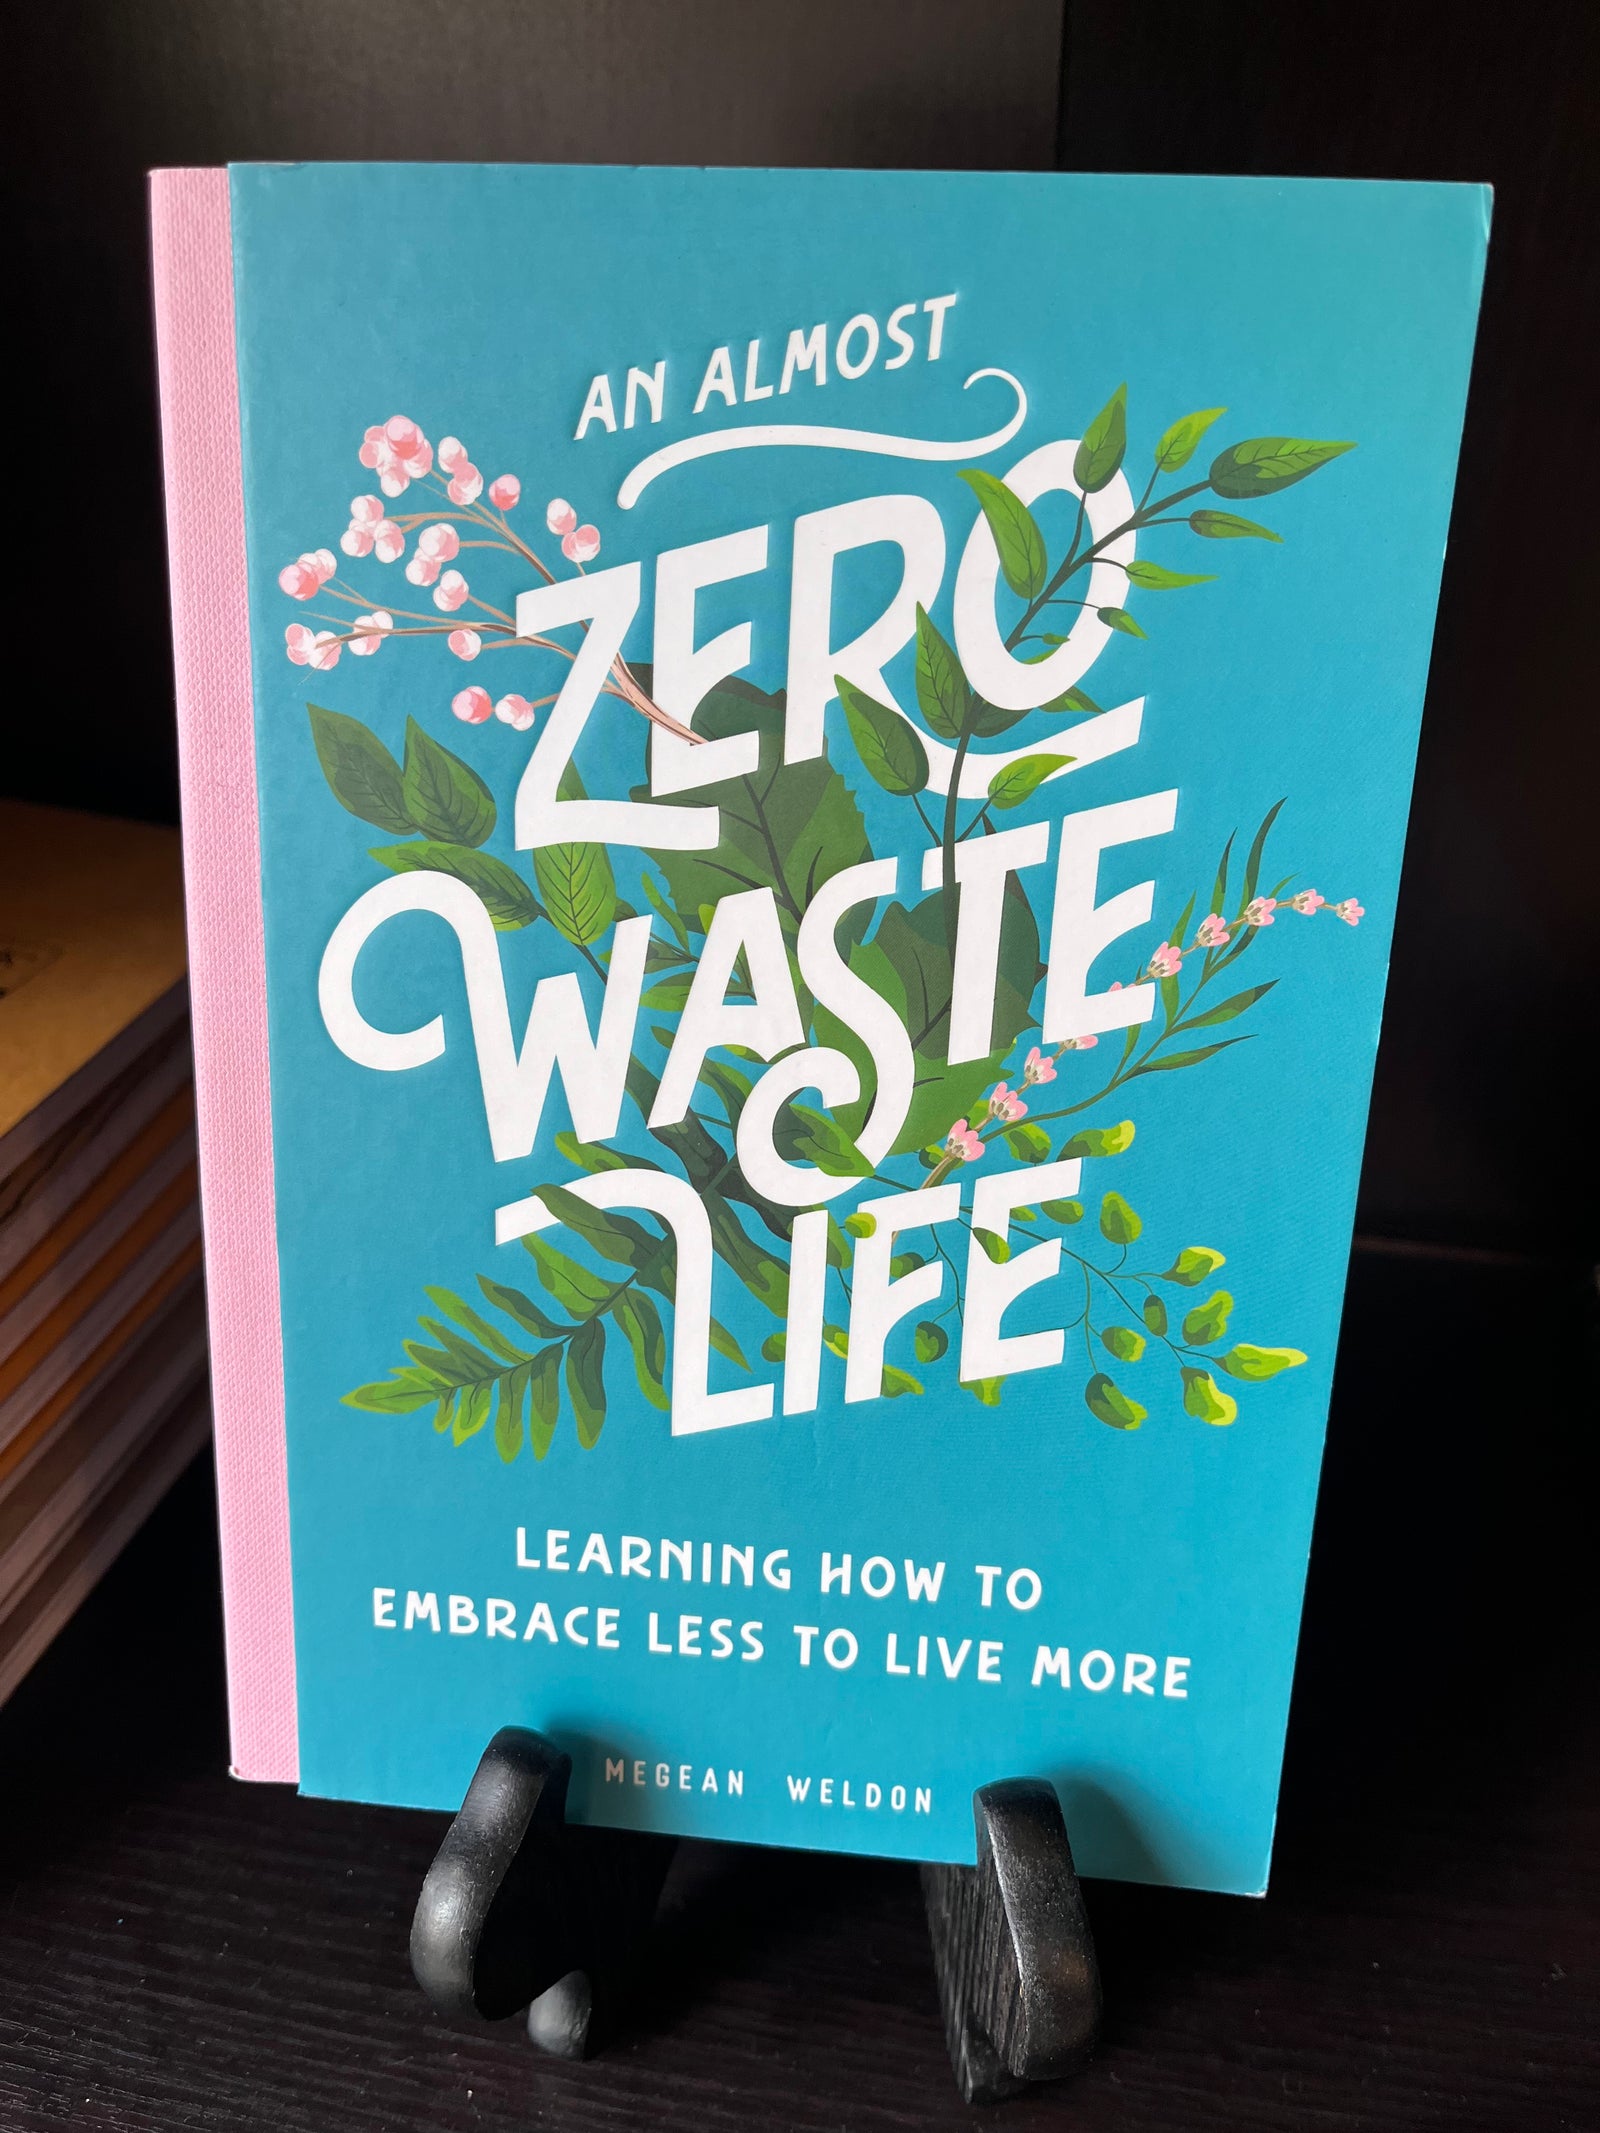 An Almost Zero Waste Life - Learning How to Embrace Less to Live More